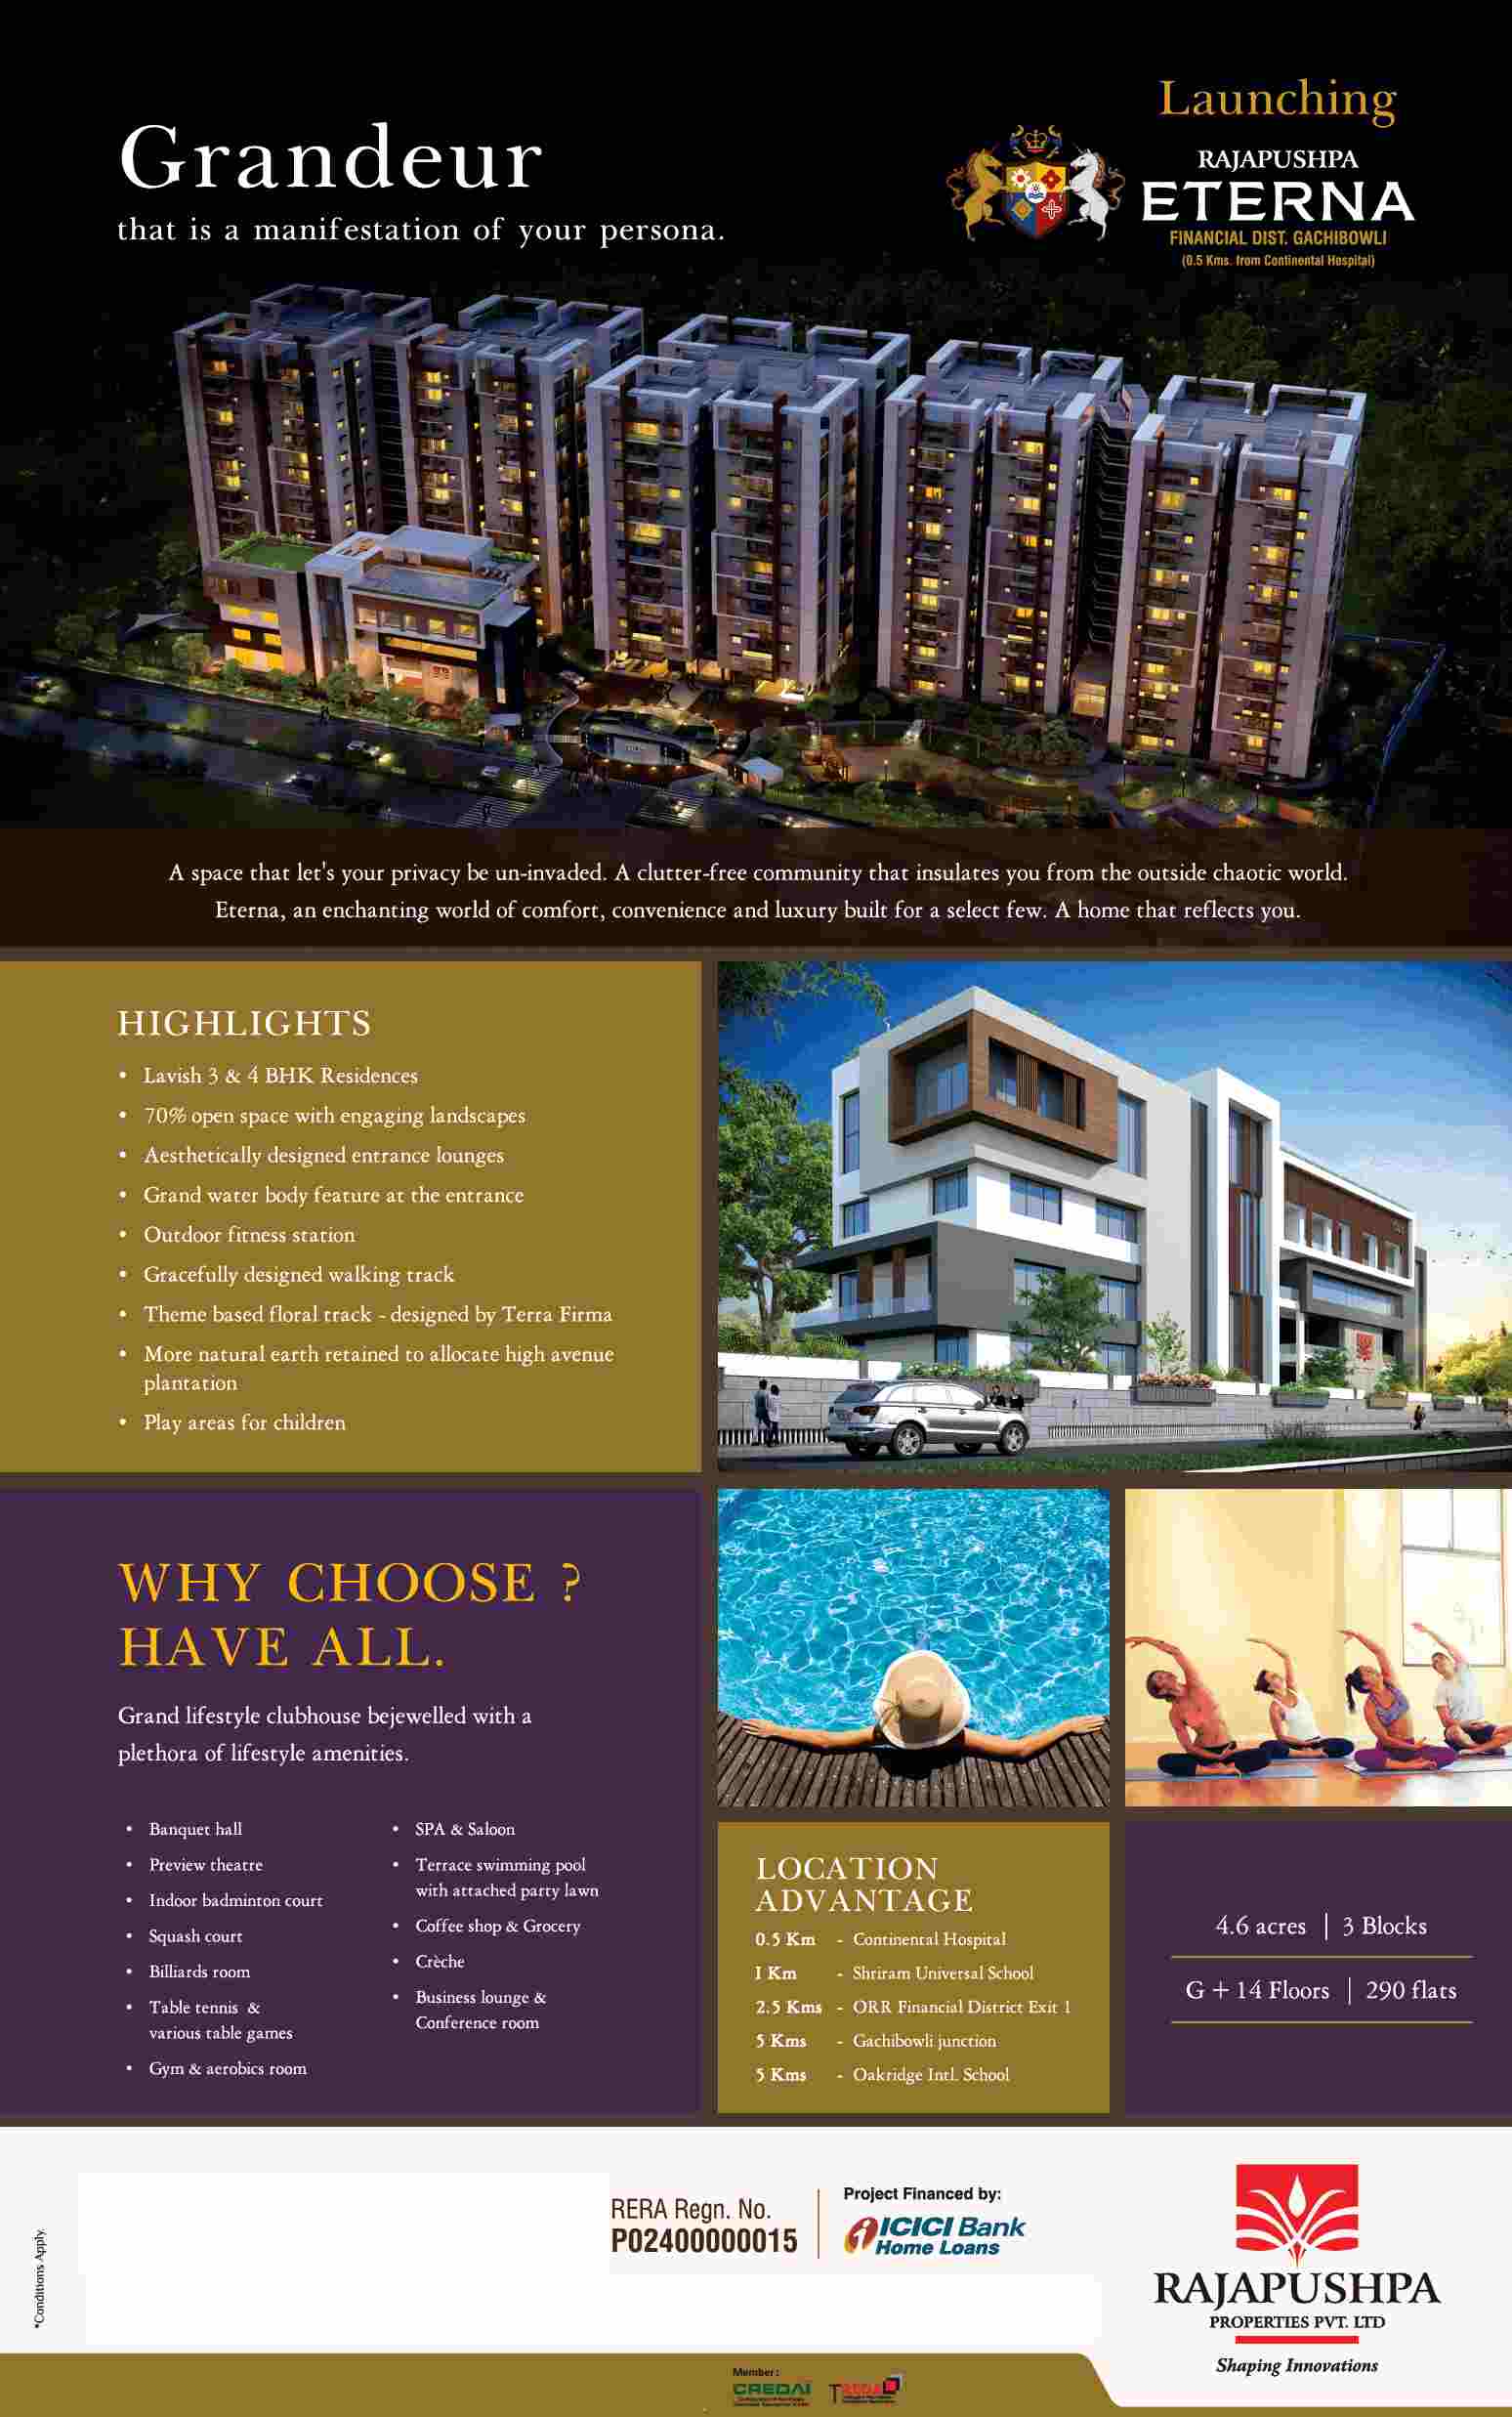 Live in an enchanting world of comfort, convenience & luxury at Rajapushpa Eterna in Hyderabad